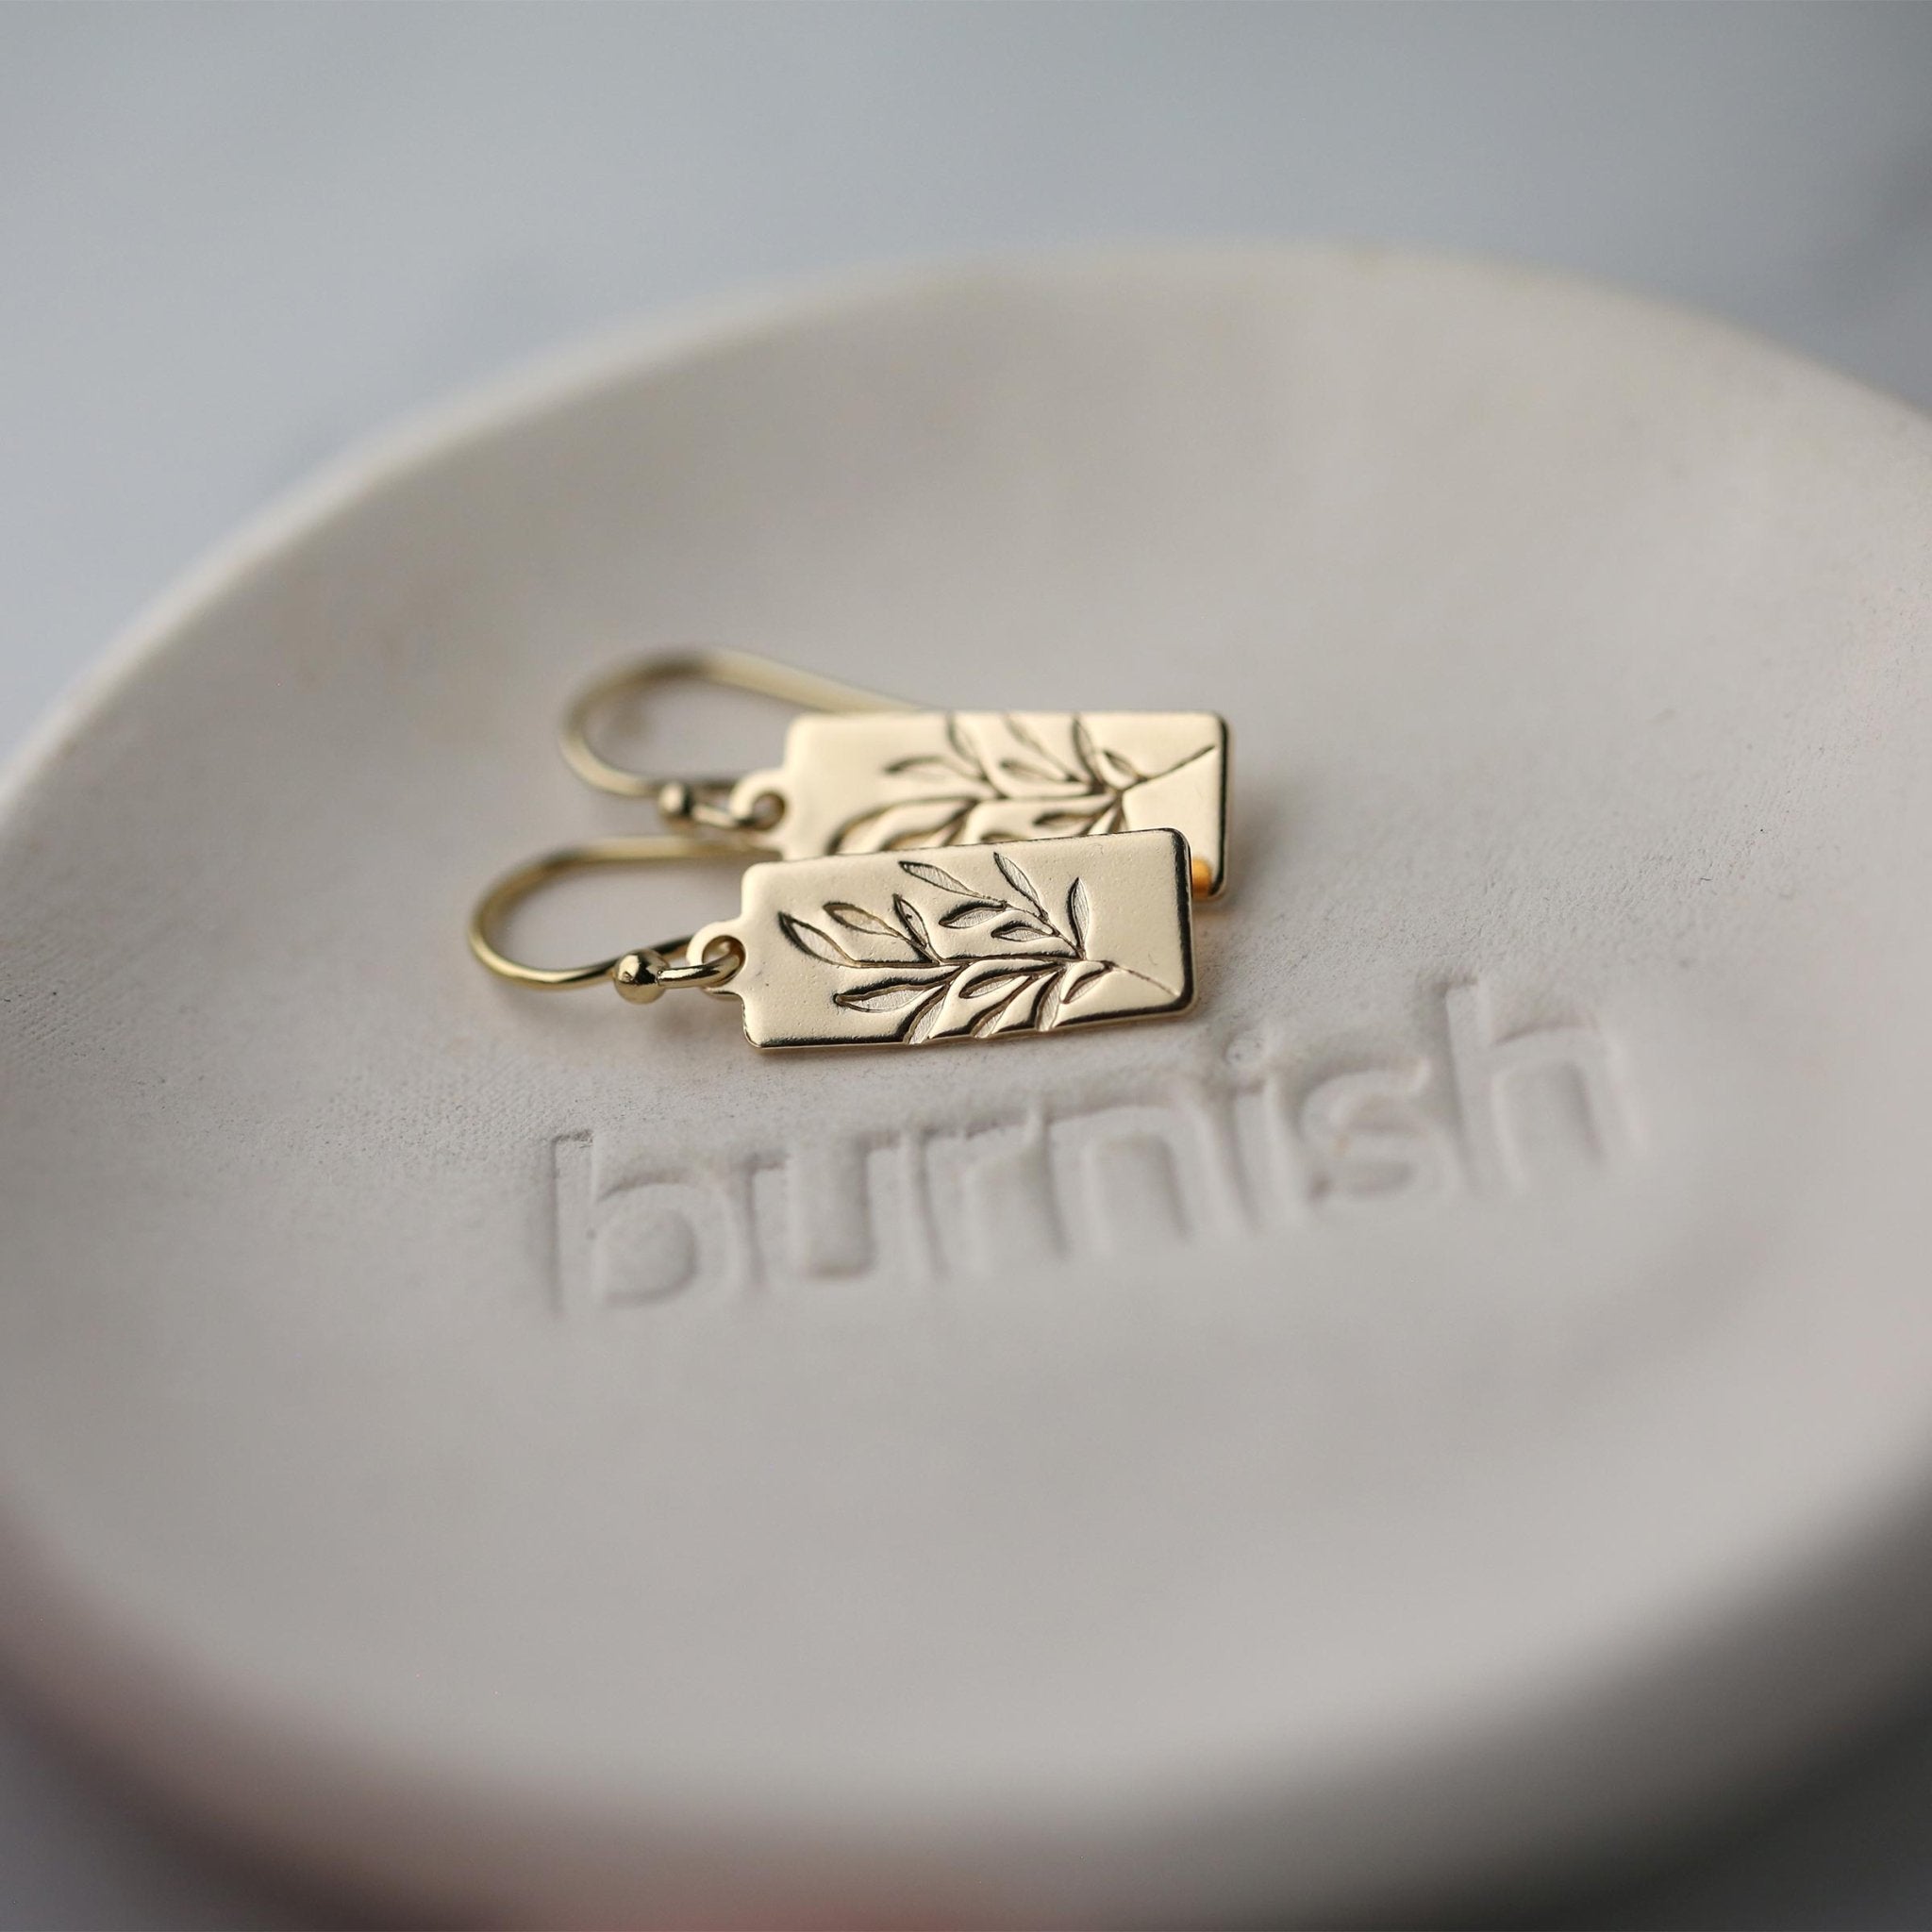 Gold Willow Leaves Tag Earrings handmade by Burnish